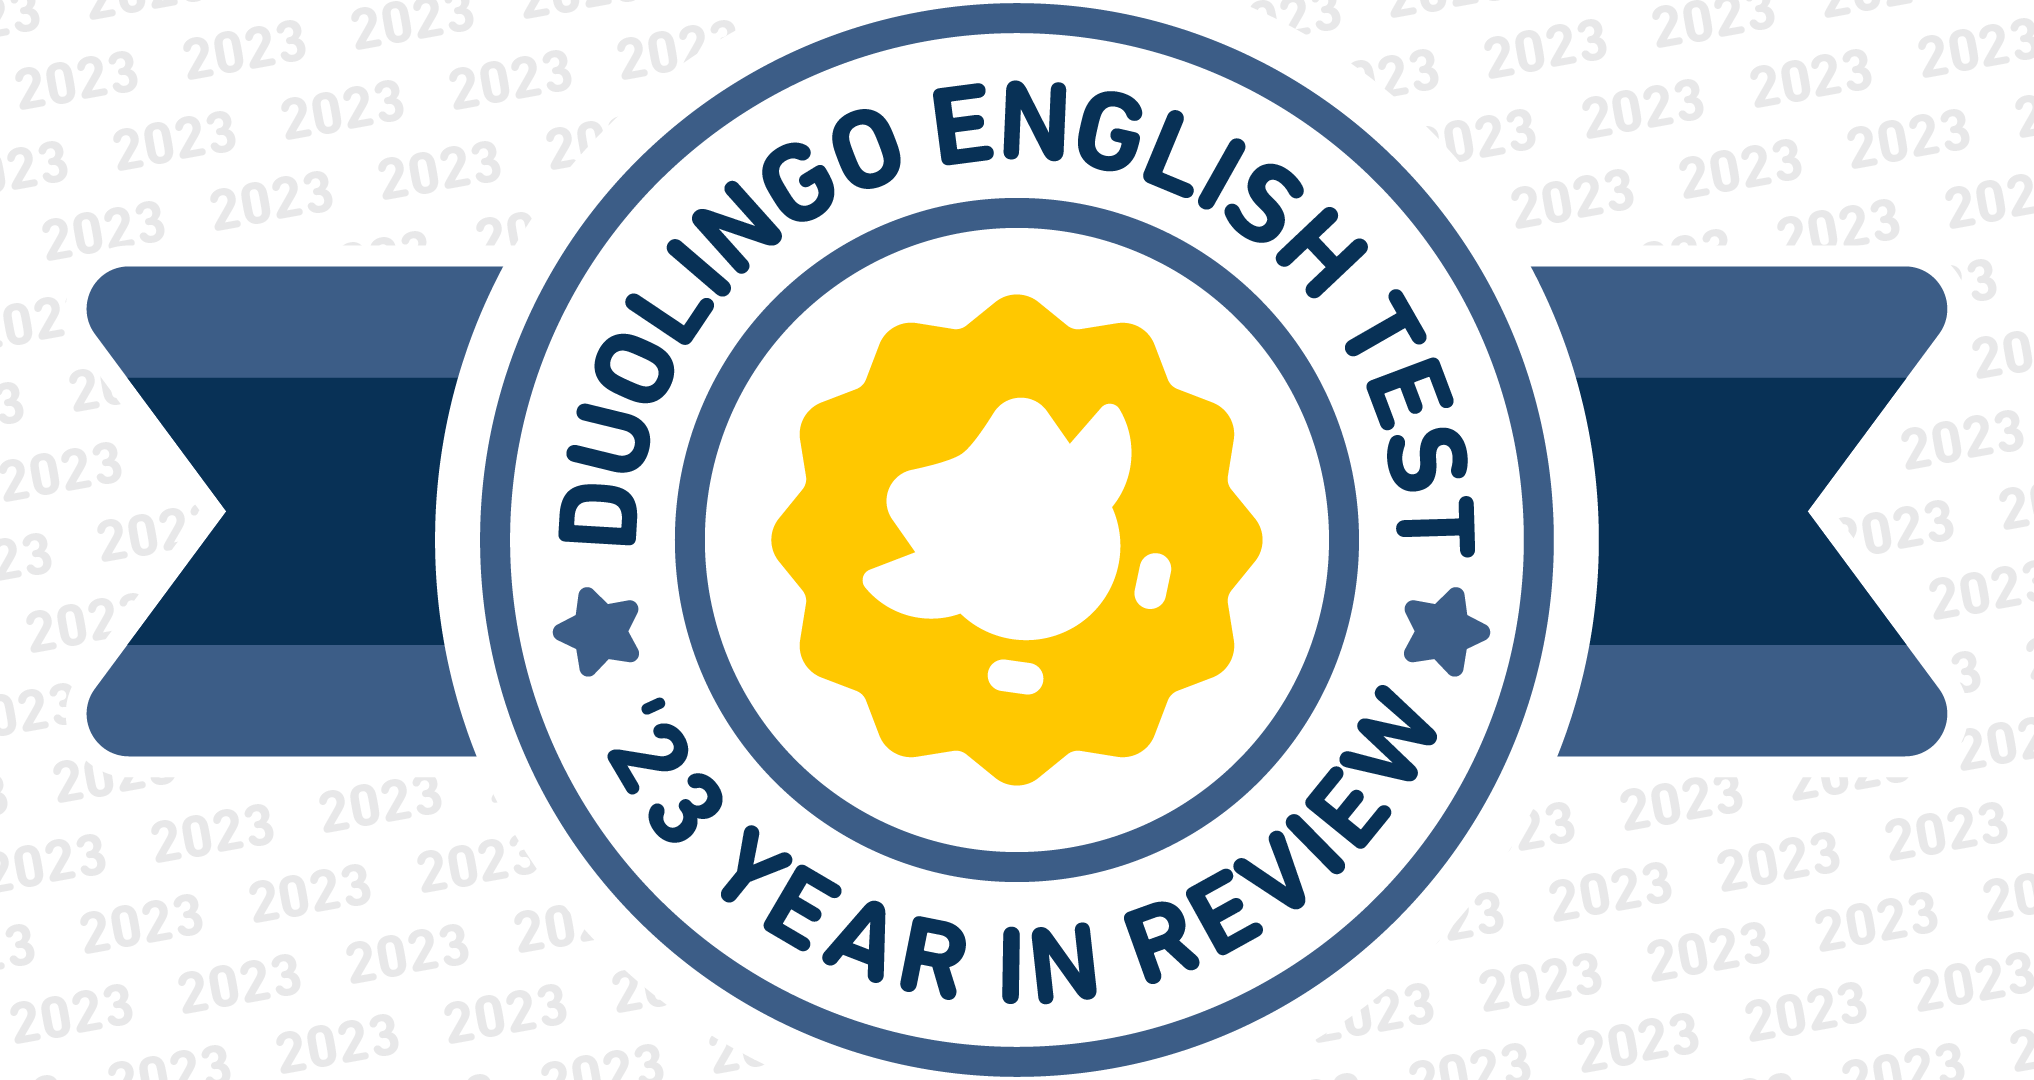 The Duolingo English Test: A year in review